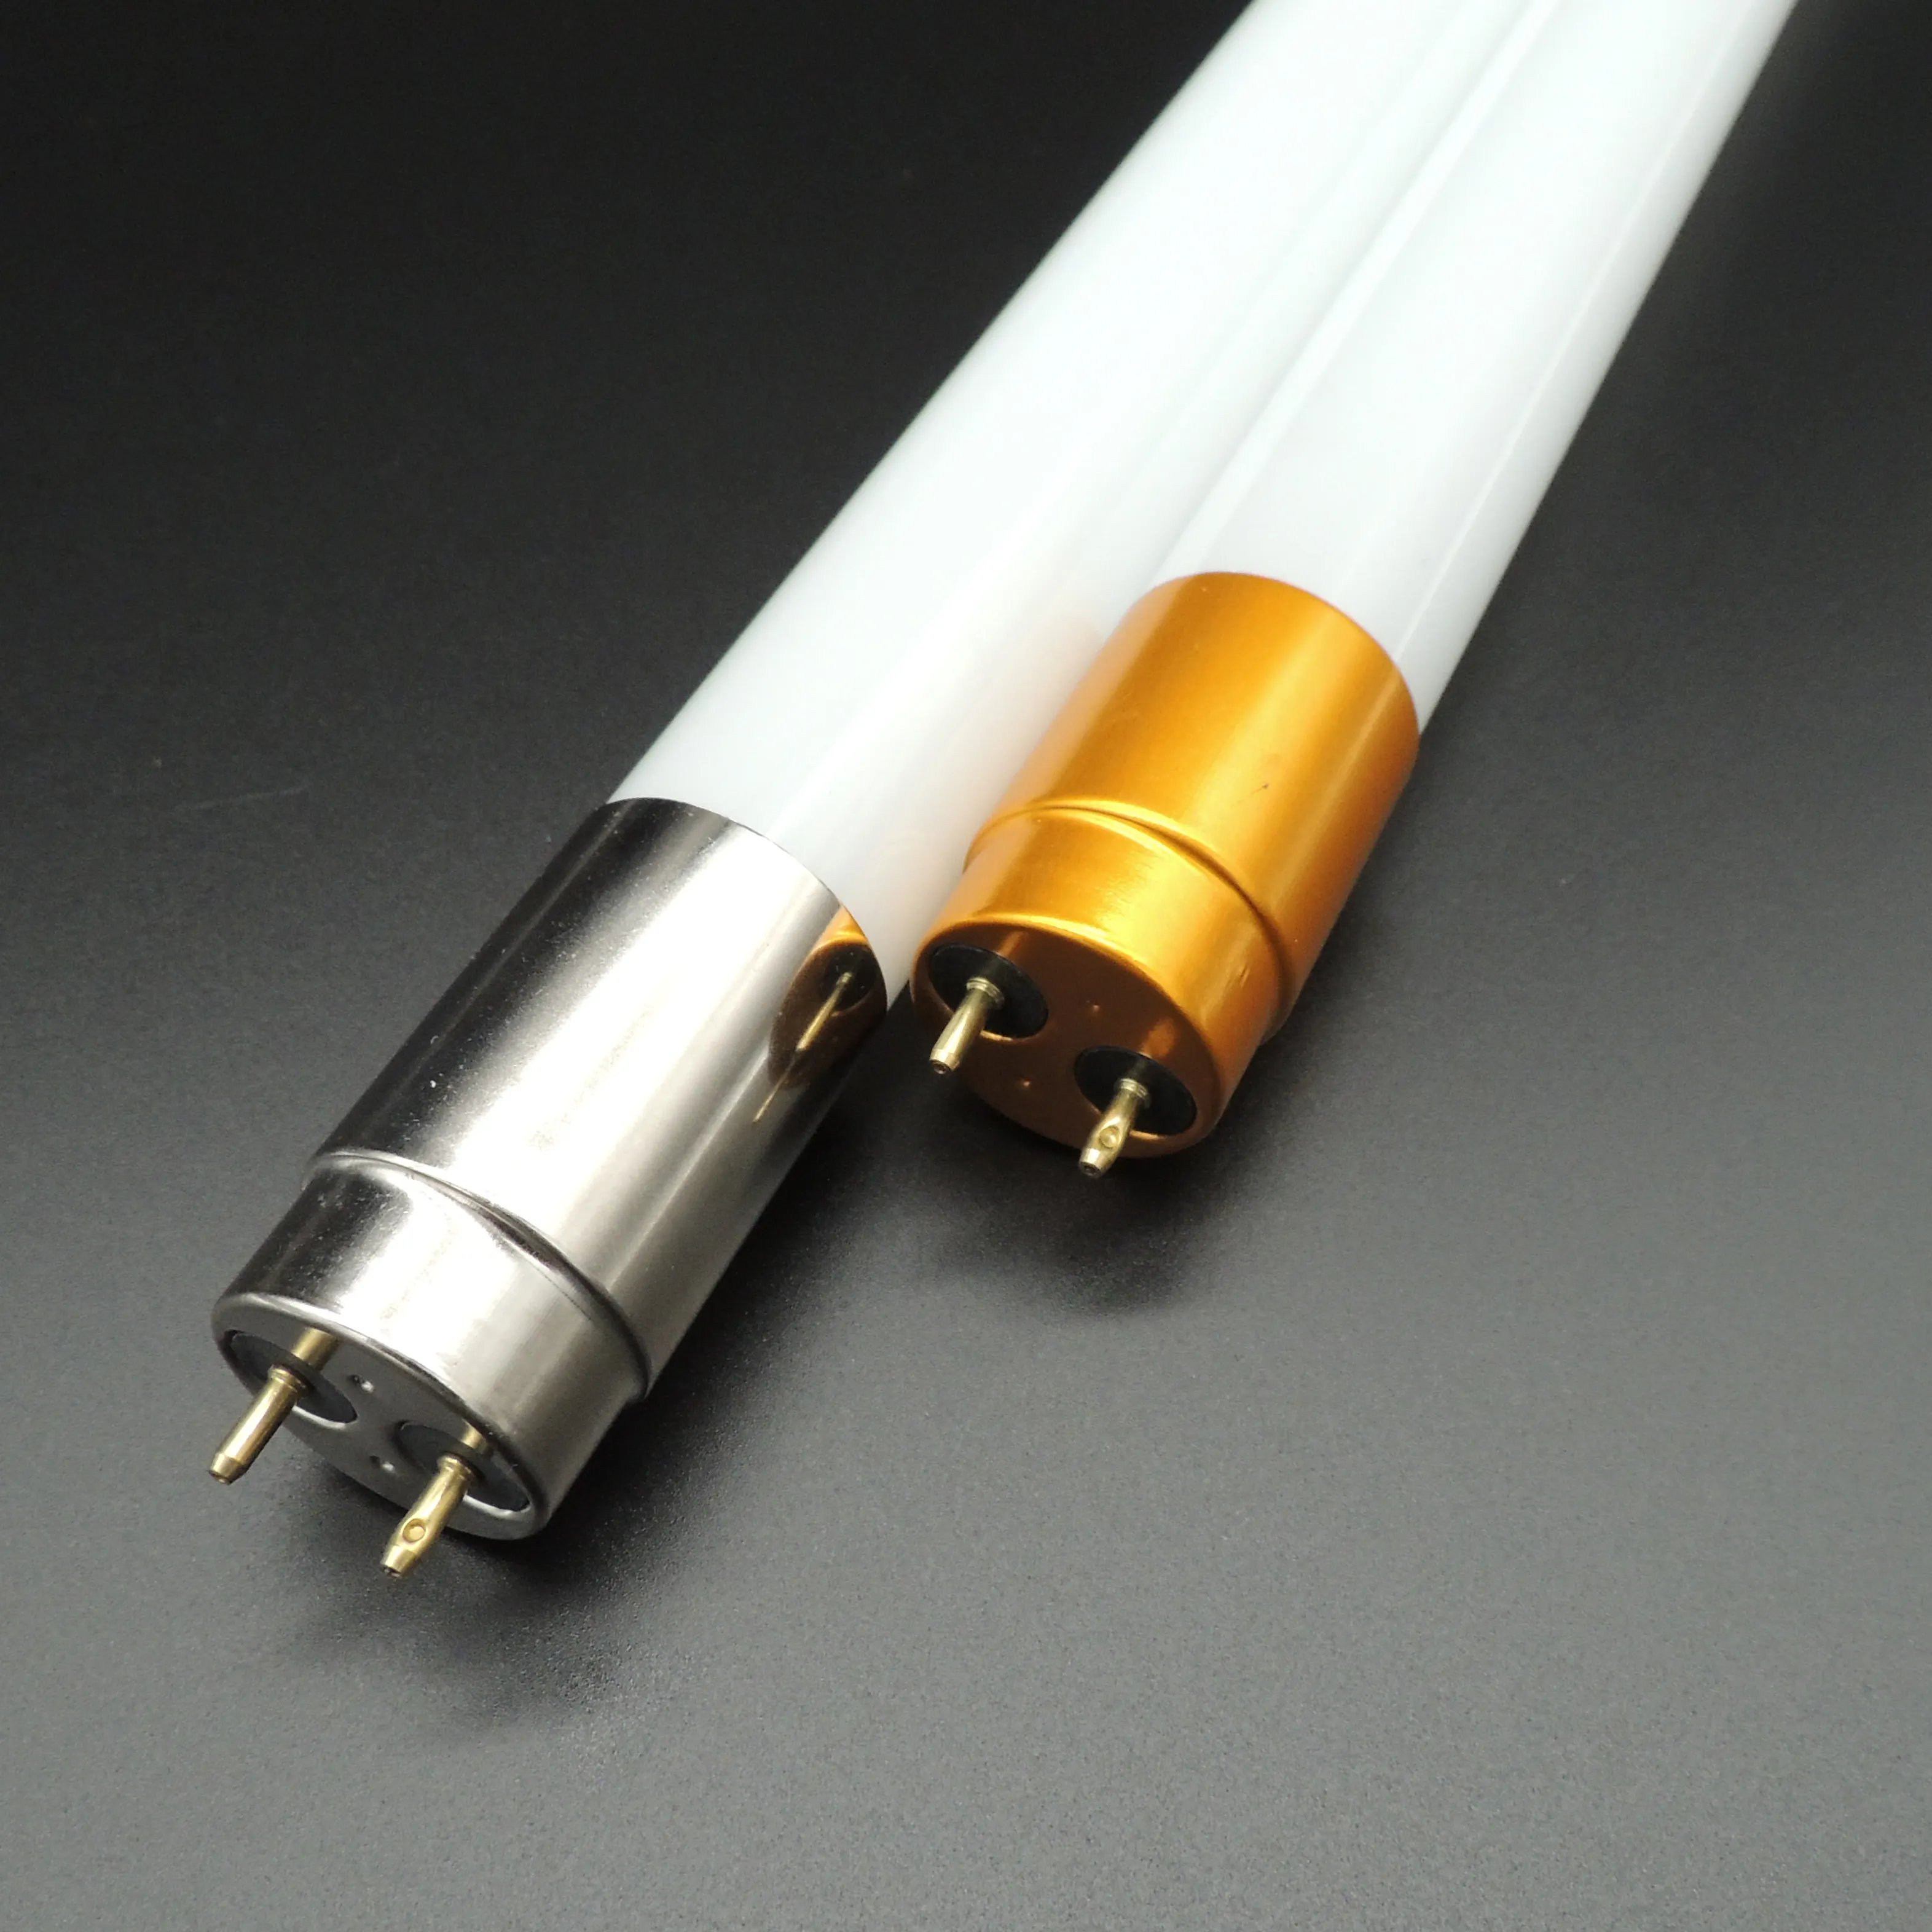 SHUANGYI 26 years Factory OEM Brand 6500K Replace for fluorescent tube 4ft 2ft SMD2835 10W 12W 14W 16W 18W T8 LED TUBE light